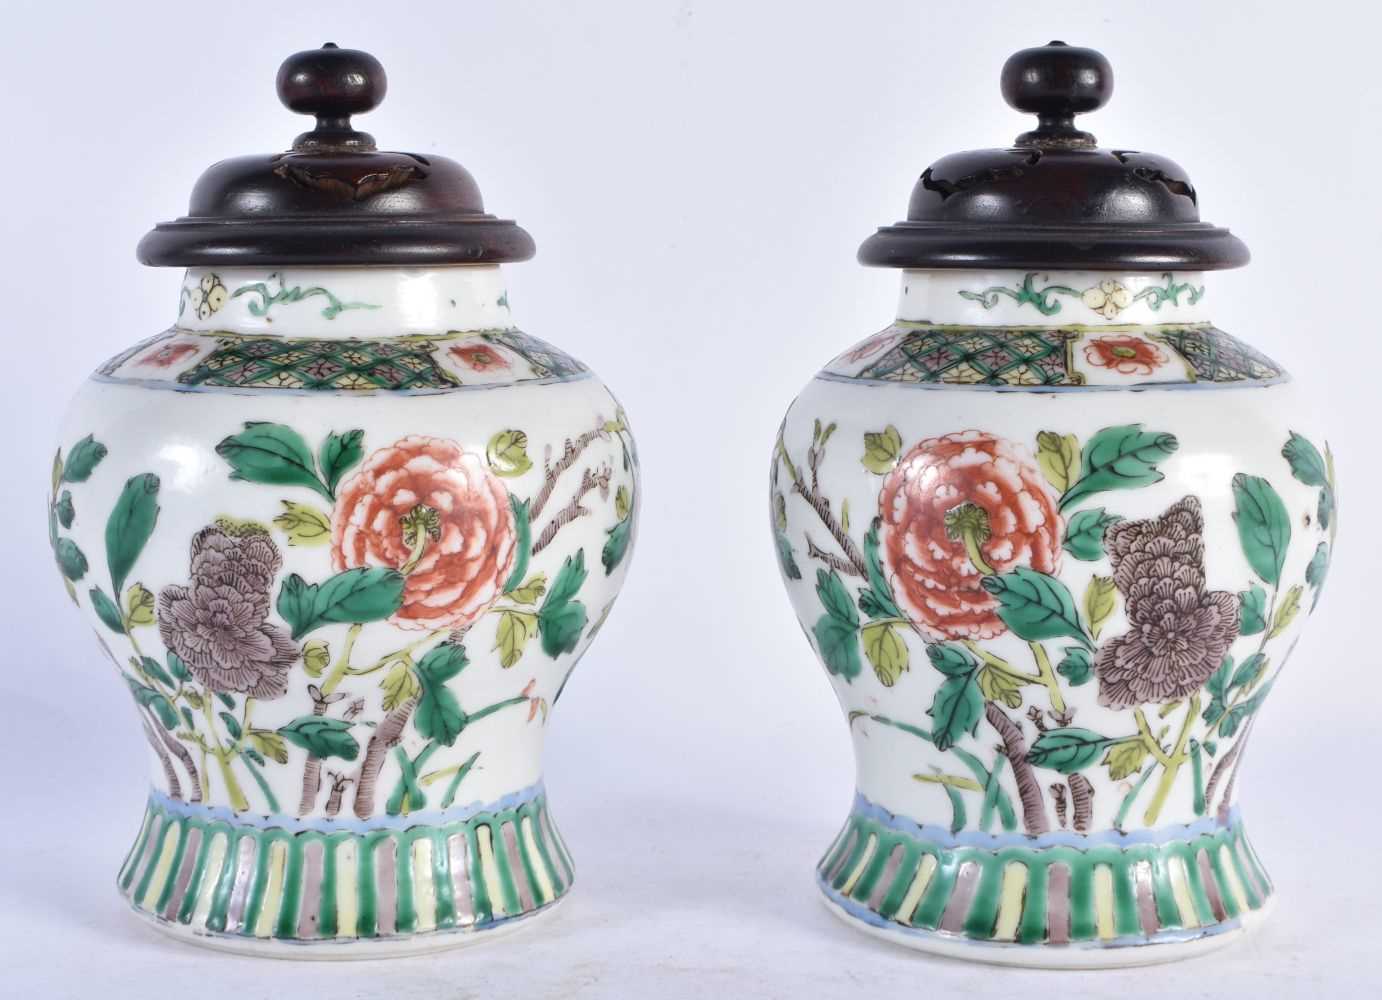 A PAIR OF 19TH CENTURY CHINESE FAMILLE VERTE PORCELAIN JARS Kangxi style. 17 cm high.